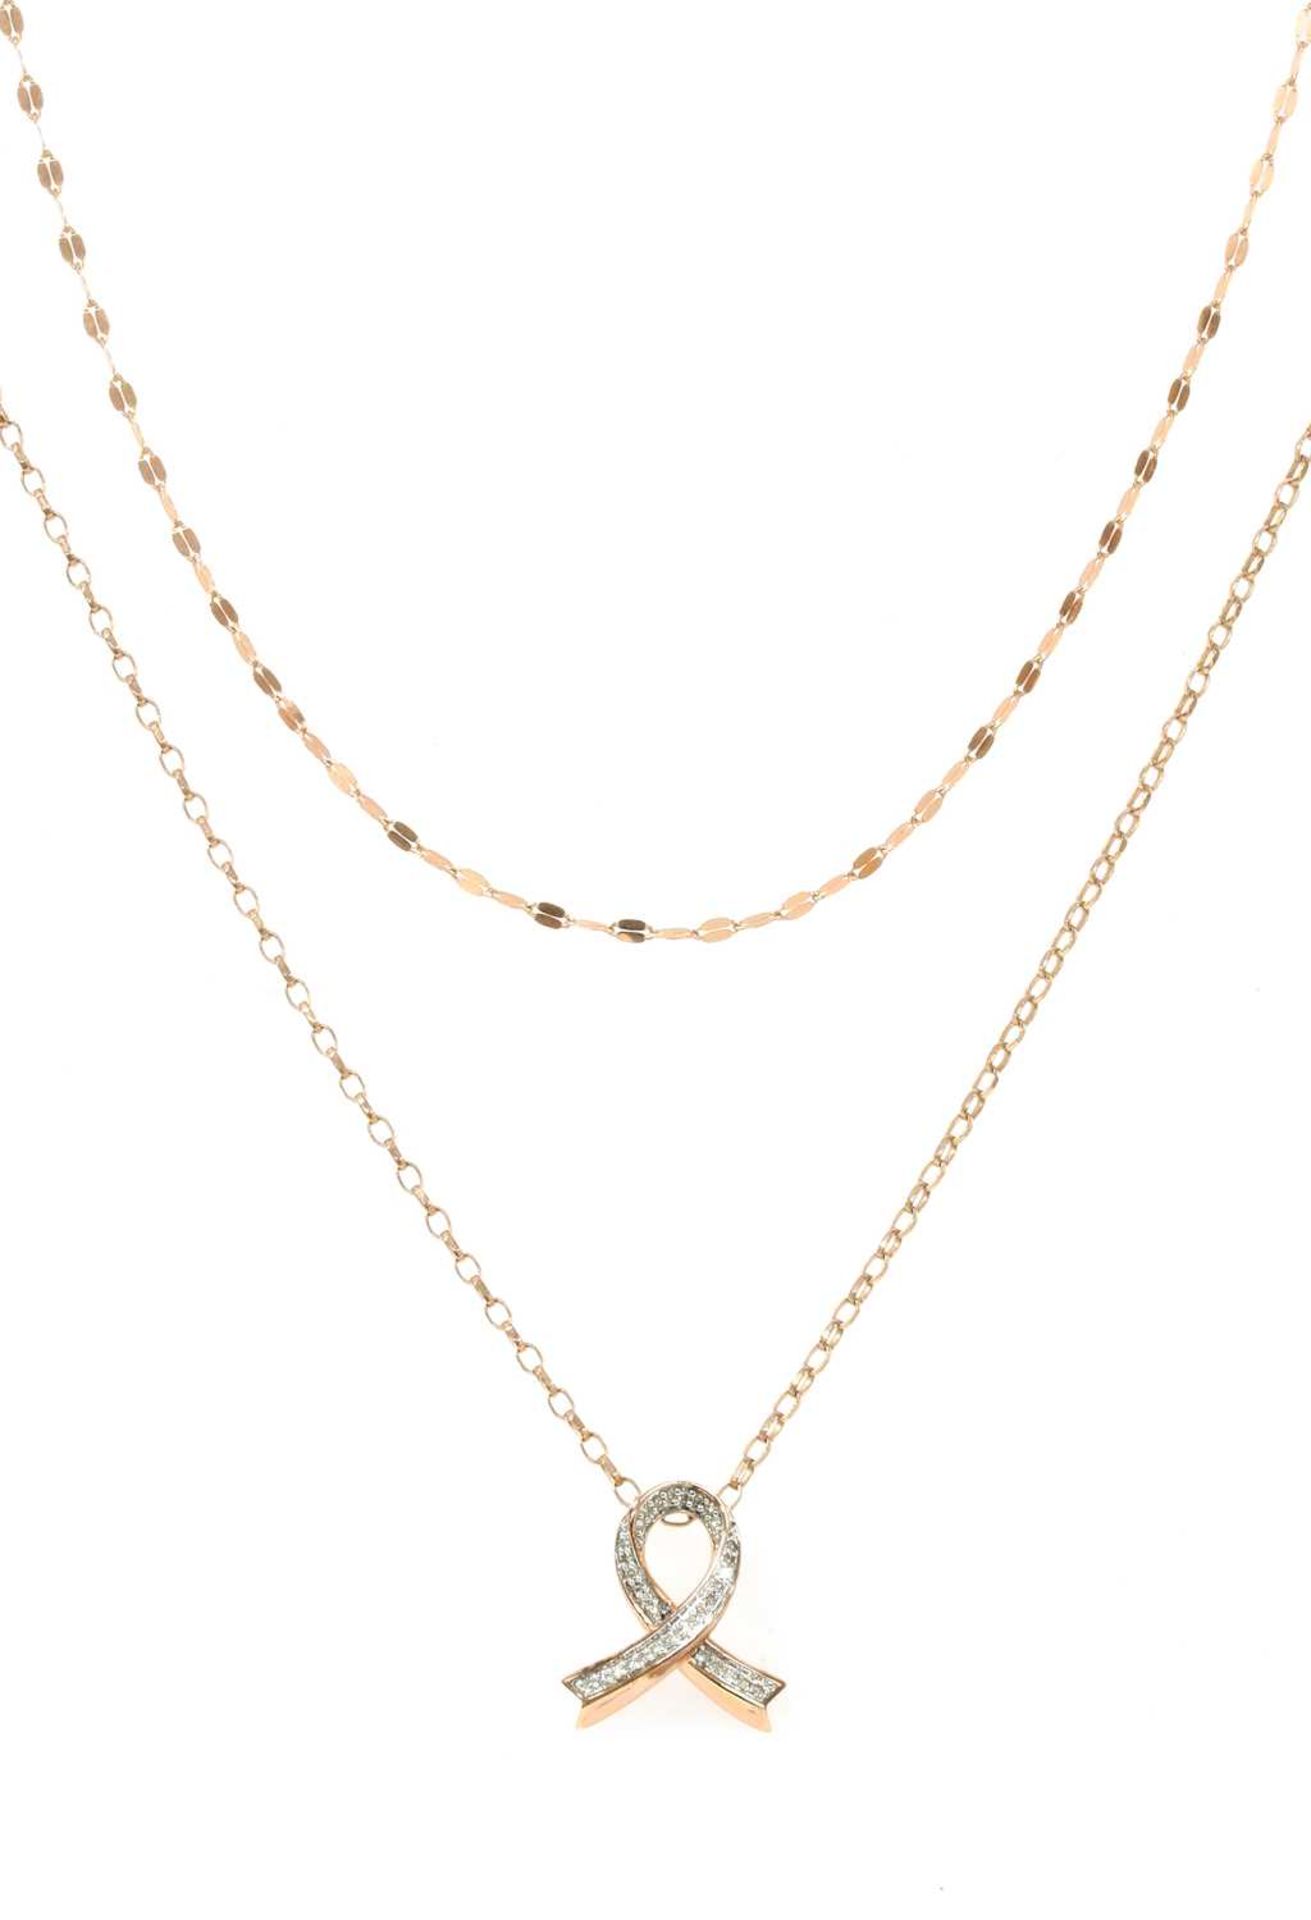 An 18ct rose gold chain,